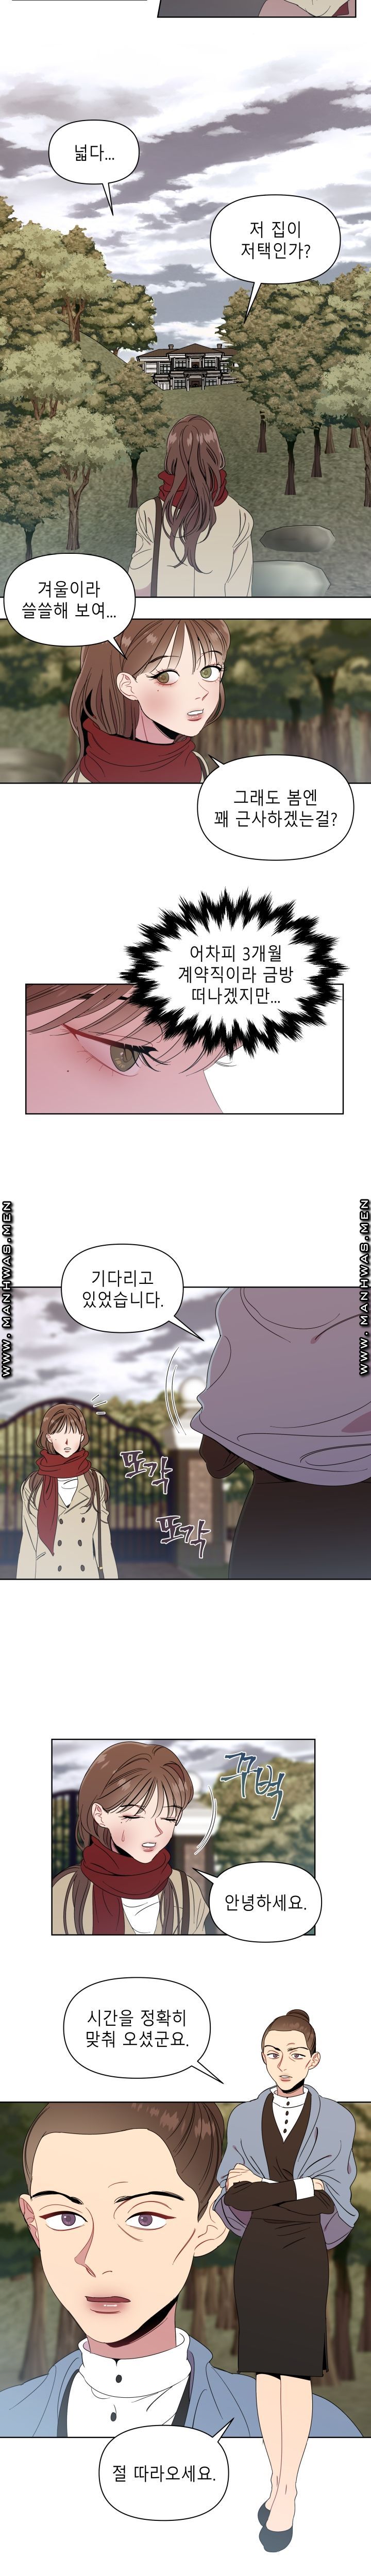 Heaven Raw - Chapter 1 Page 7